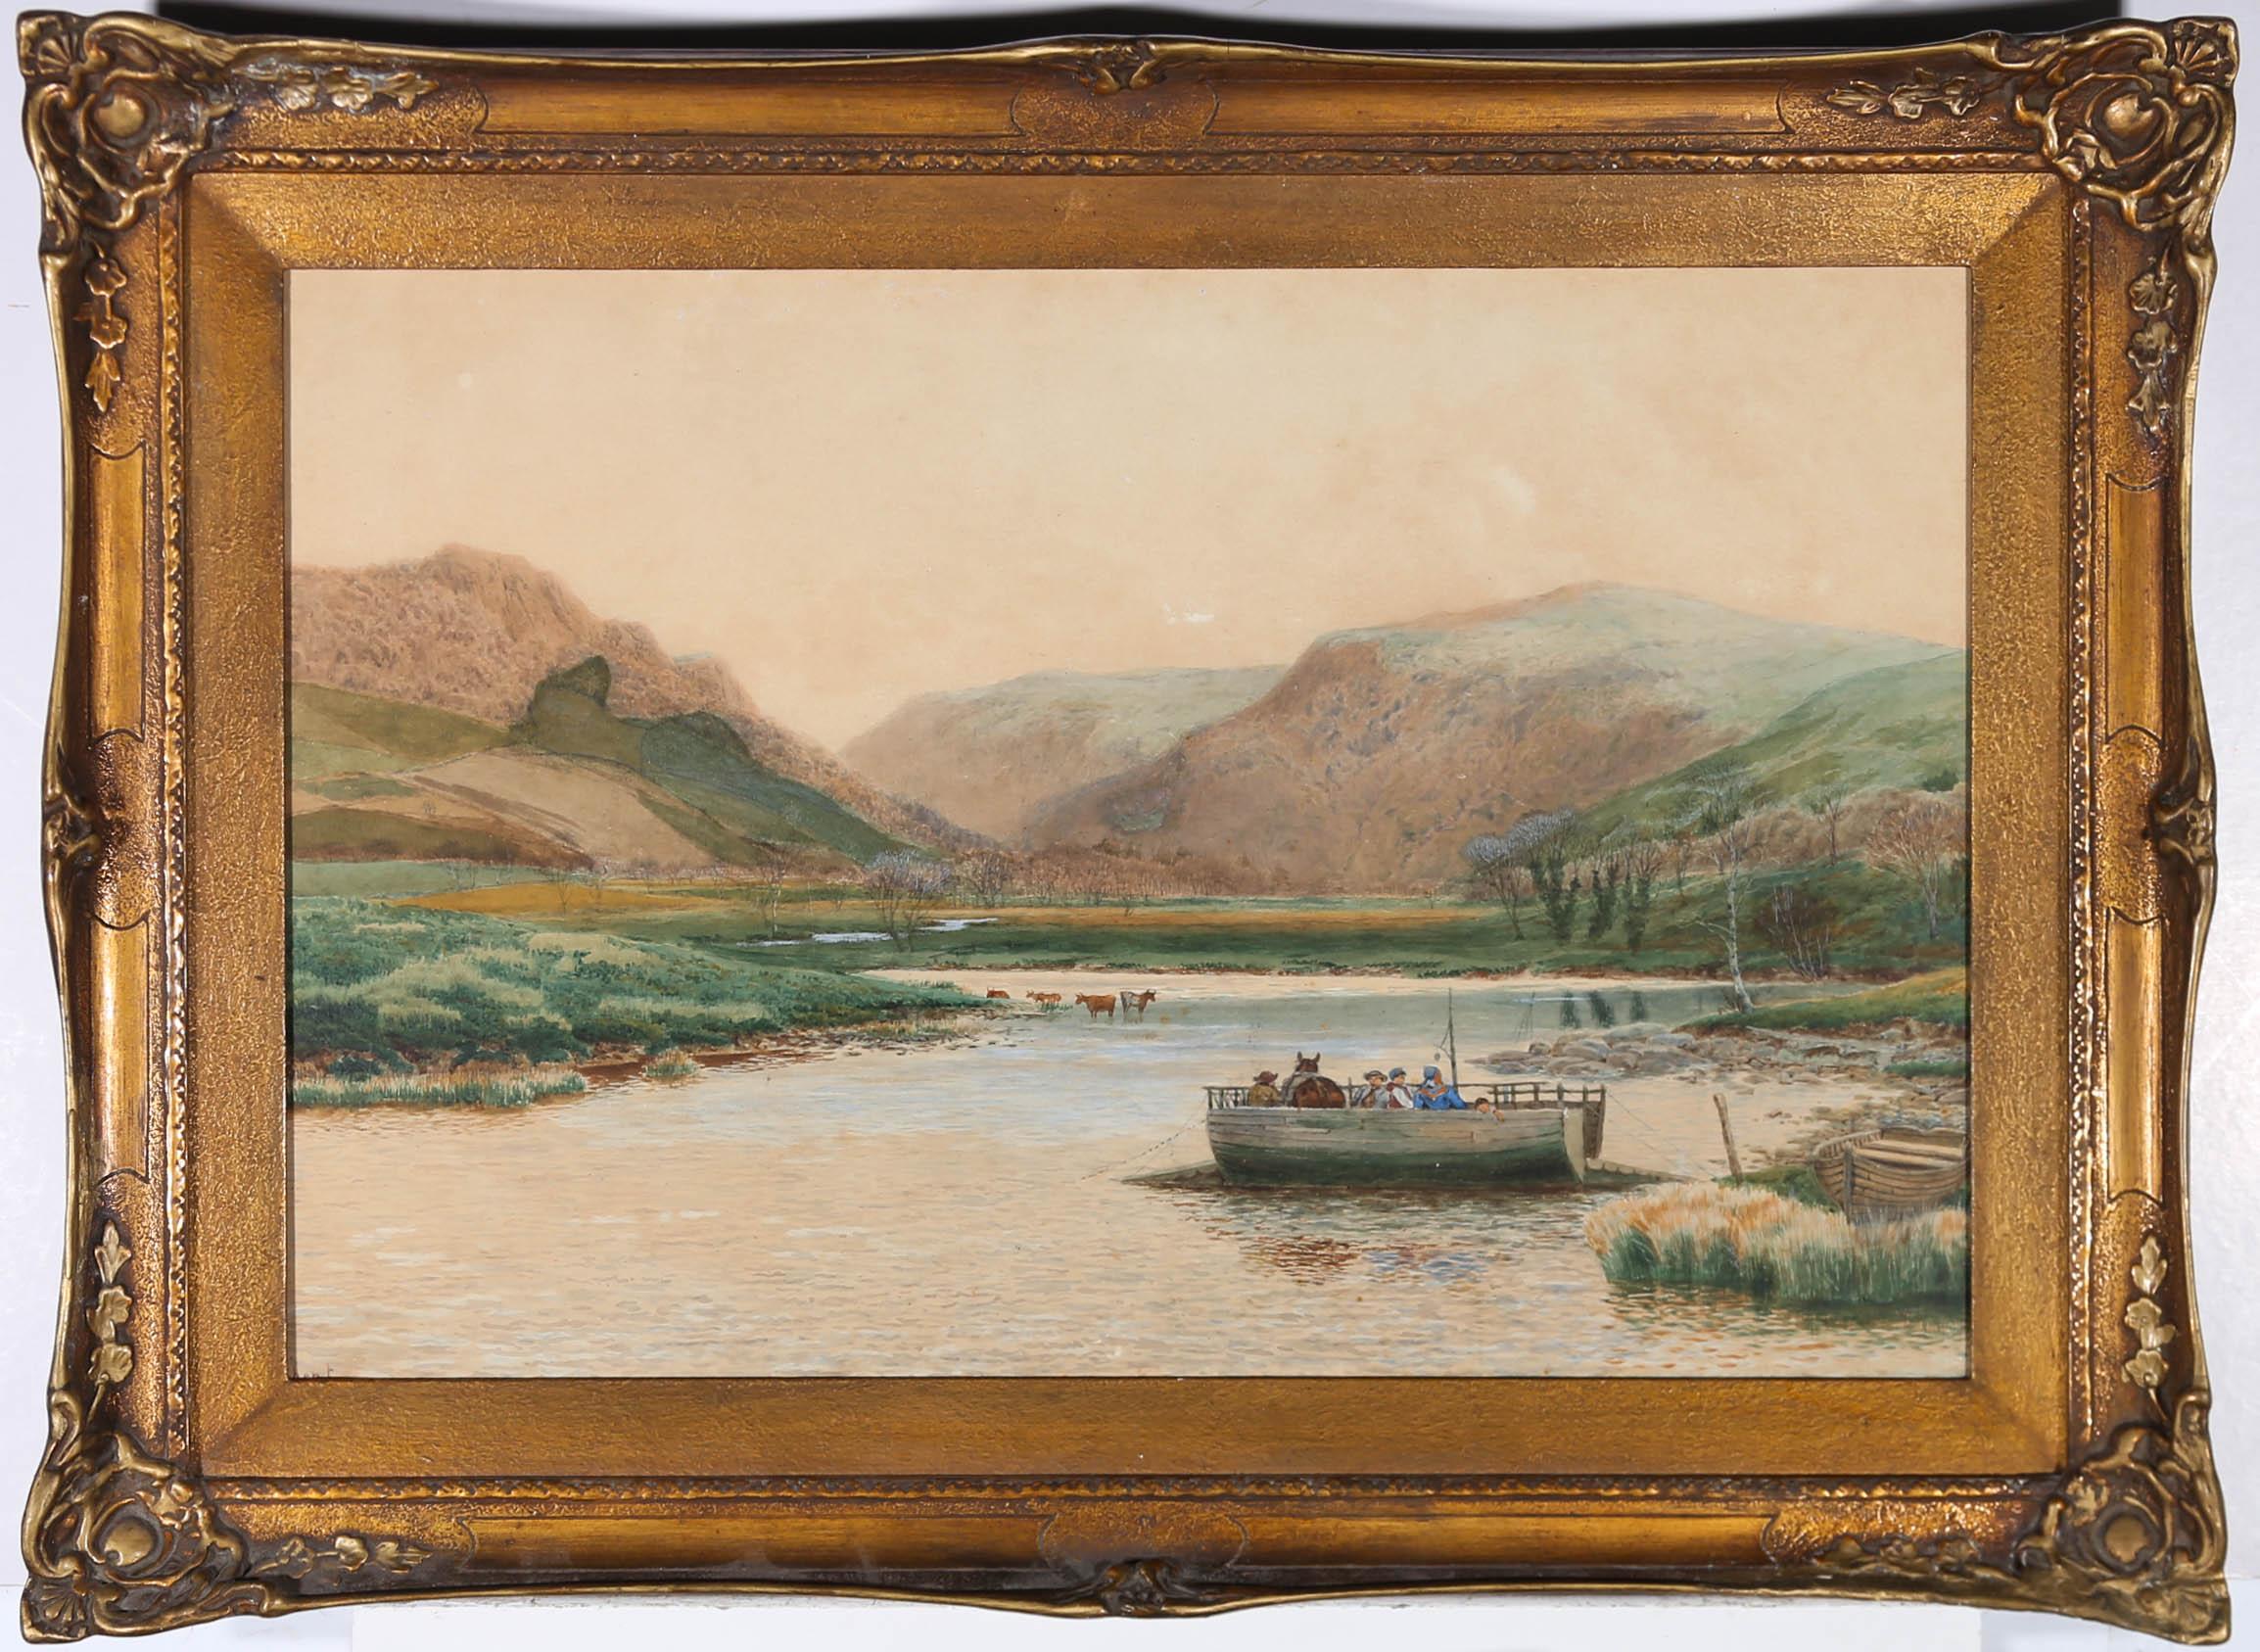 A charming late 19th Century watercolour landscape showing a chain ferry crossing a river in a highland landscape. The artist has signed to the lower left and the painting has been presented in a 20th Century gilt frame with swept rail and corners